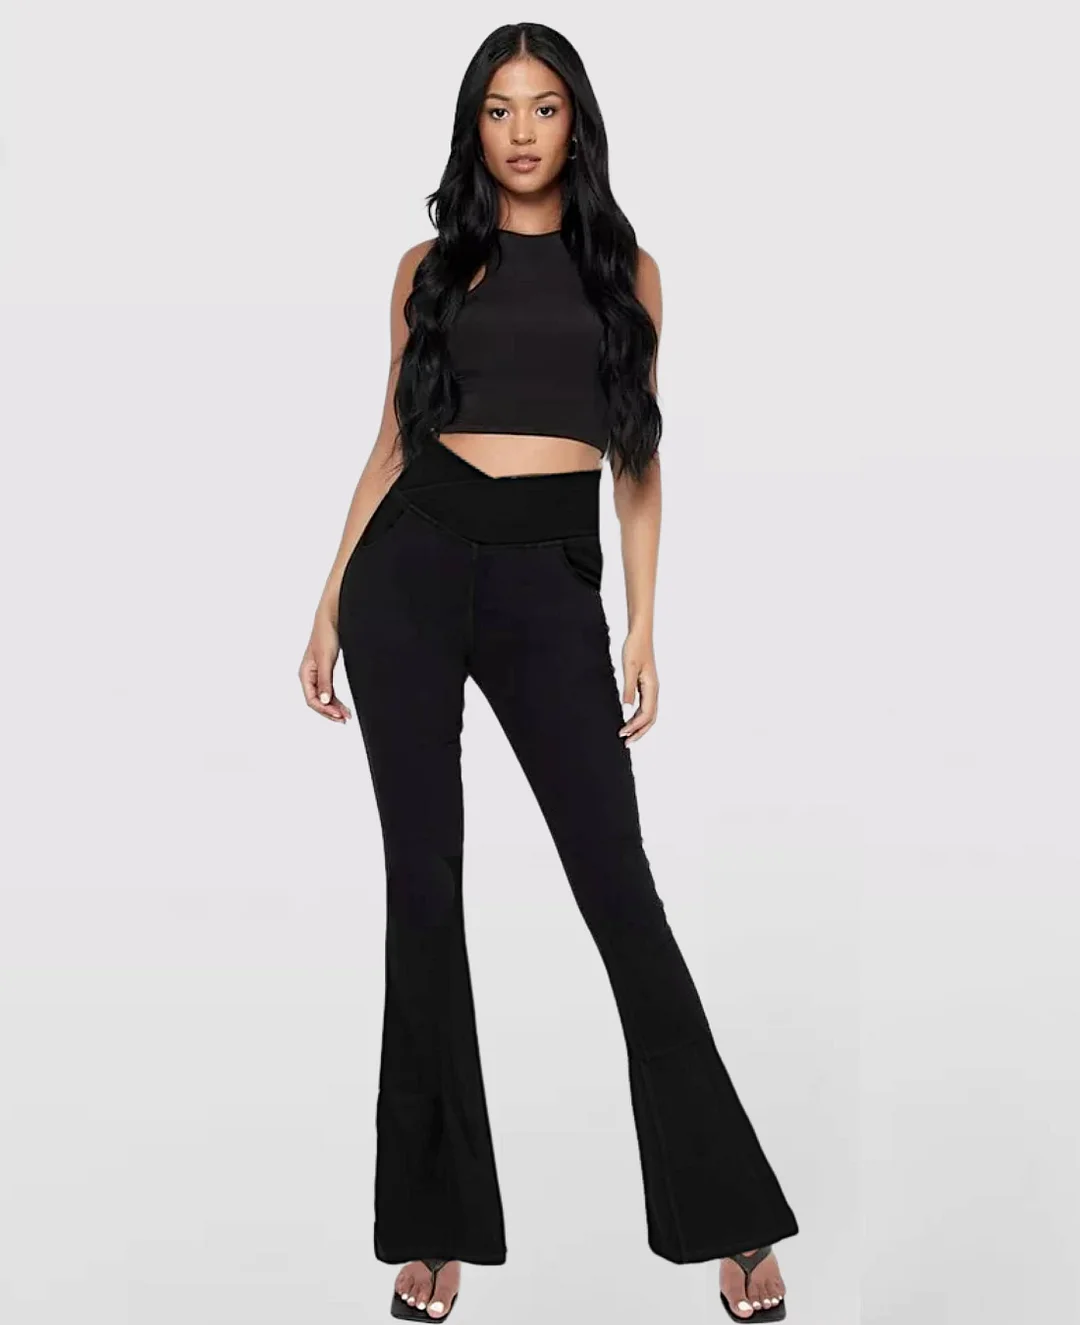 🍑Flash Black Friday Deal👖High Waisted Crossover Pocket Stretchy Flare Jeans